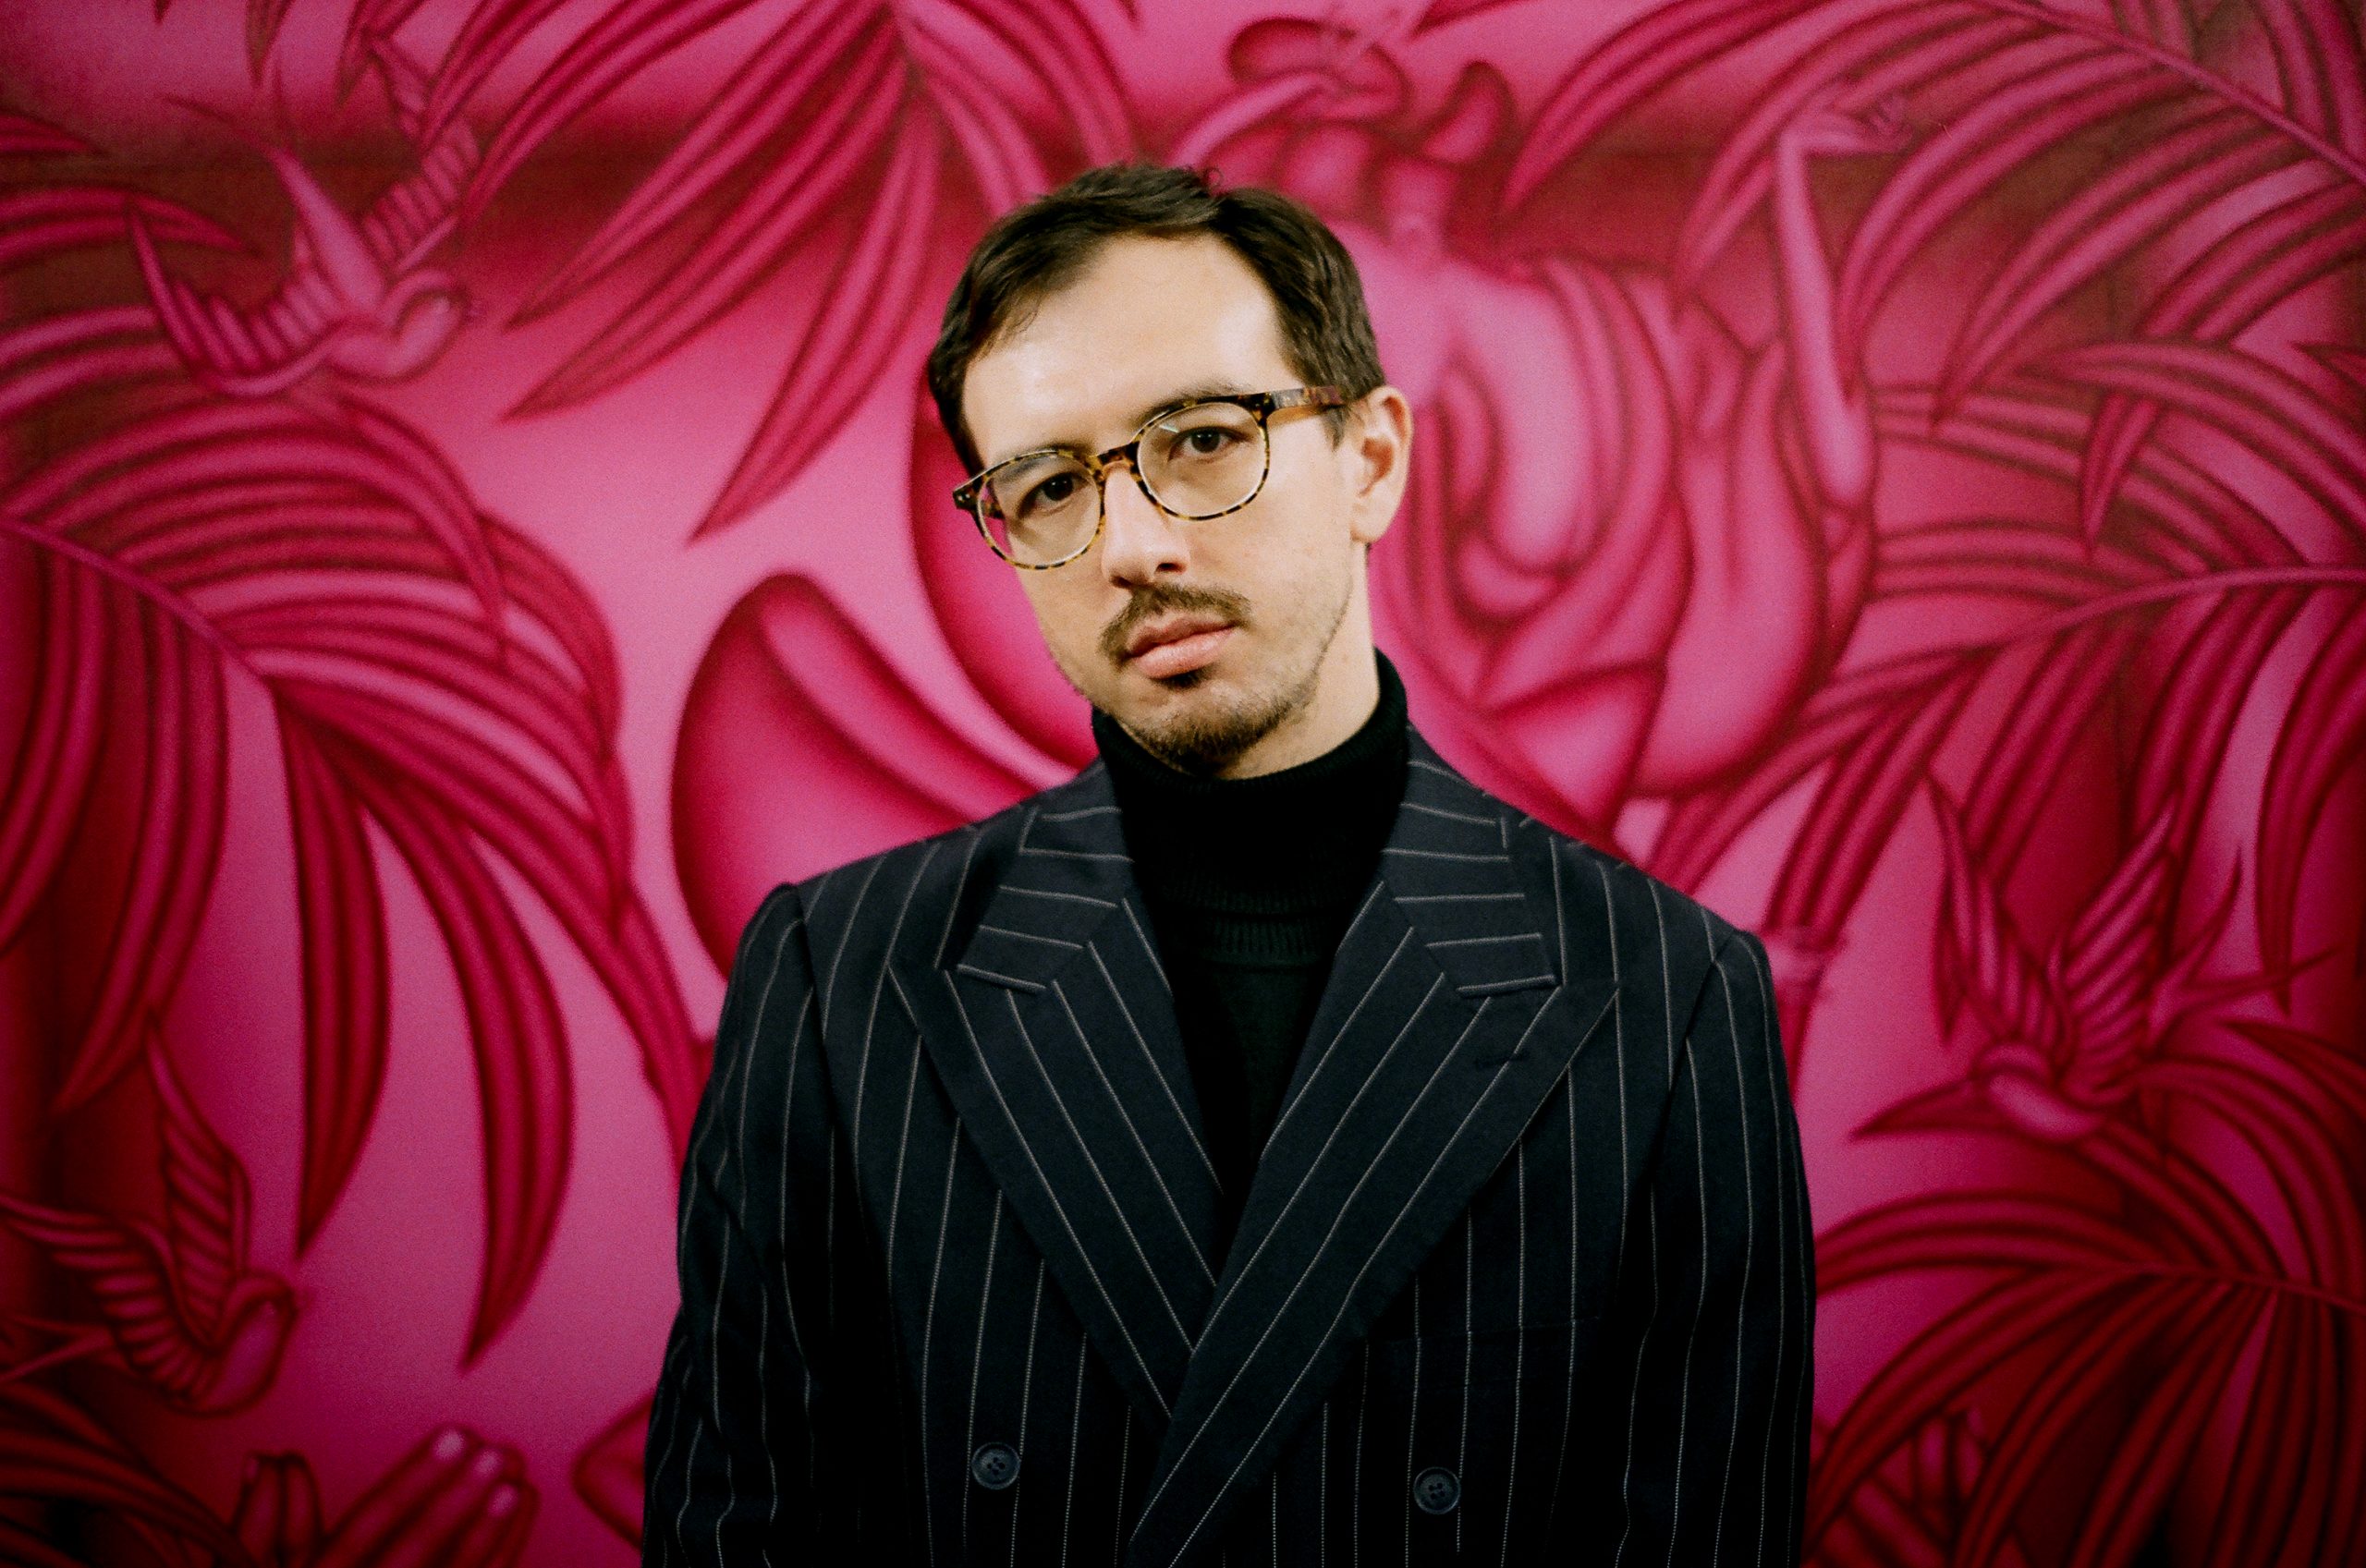 Mathew Tom headshot. In this horizontally oriented photo, a mixed Chinese American man in his mid-thirties stands in front of one of his large-scale magenta paintings. He has his head tilted slightly to the left and looks directly at the camera. Mathew has short brown hair, a goatee, and wears a black turtleneck, a black and white pinstripe blazer with a wide lapel, and tortoiseshell rounded horn-rim glasses. The artist’s painting fills up the entire background with a radiant gradation of fuchsia and black, tropical plant leaves, and birds. Fragments of two figures can be seen as well through folds of fabric, praying hands, and a delicate arm.